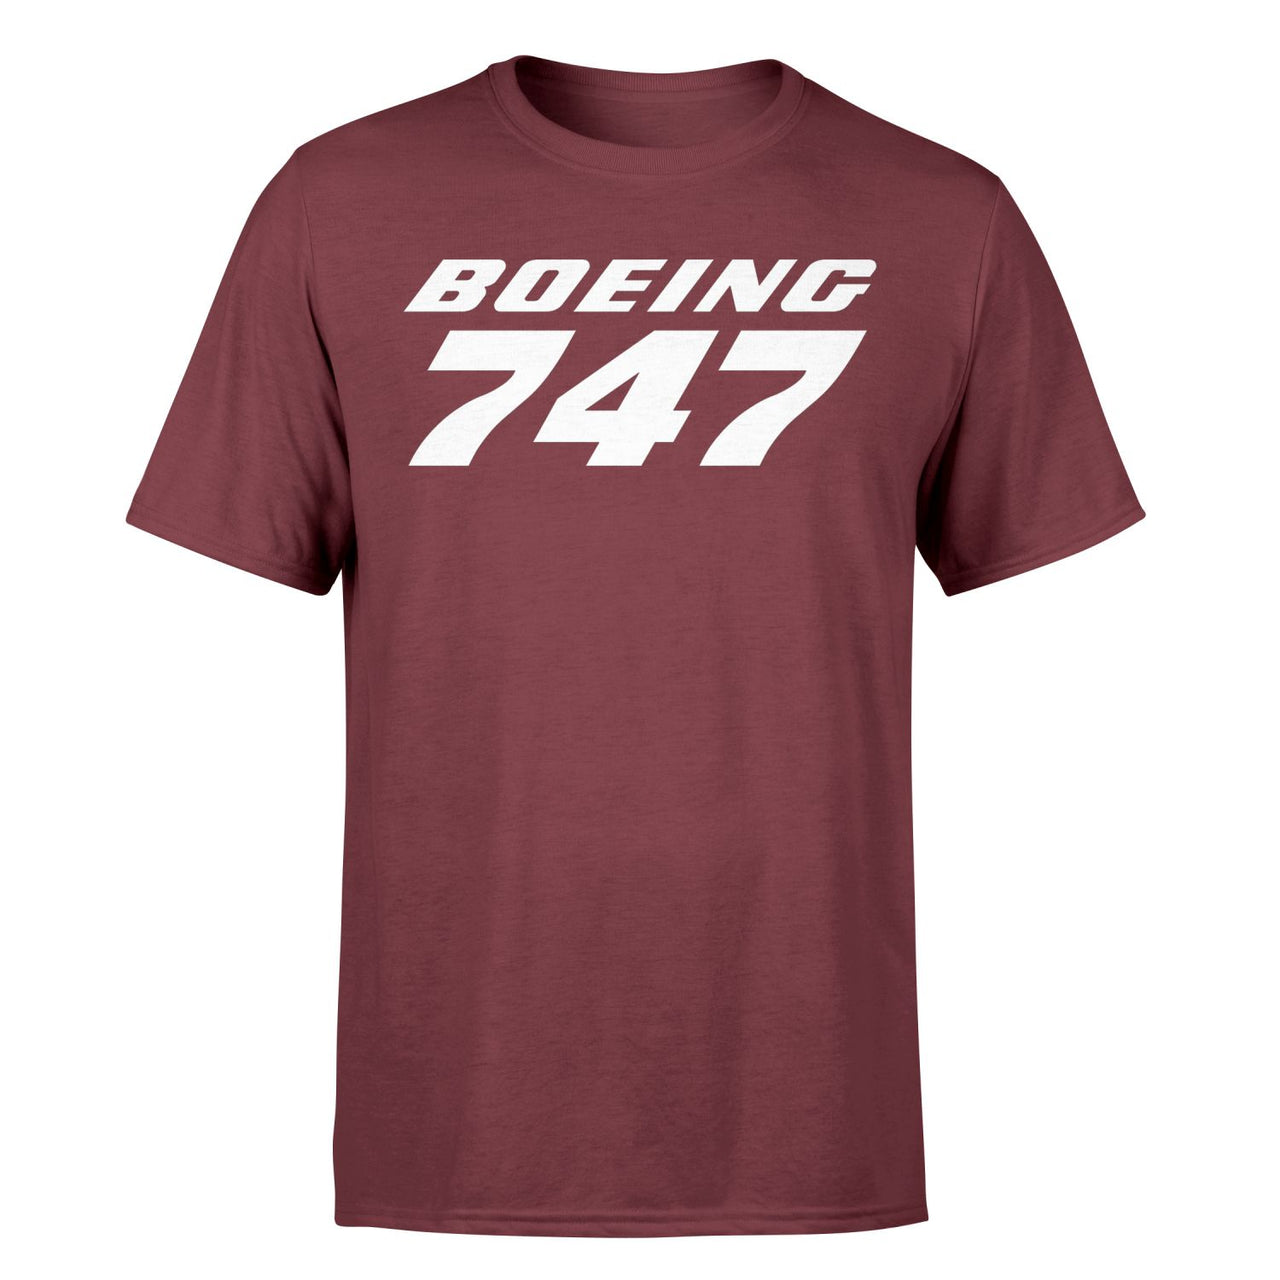 Boeing 747 & Text Designed T-Shirts